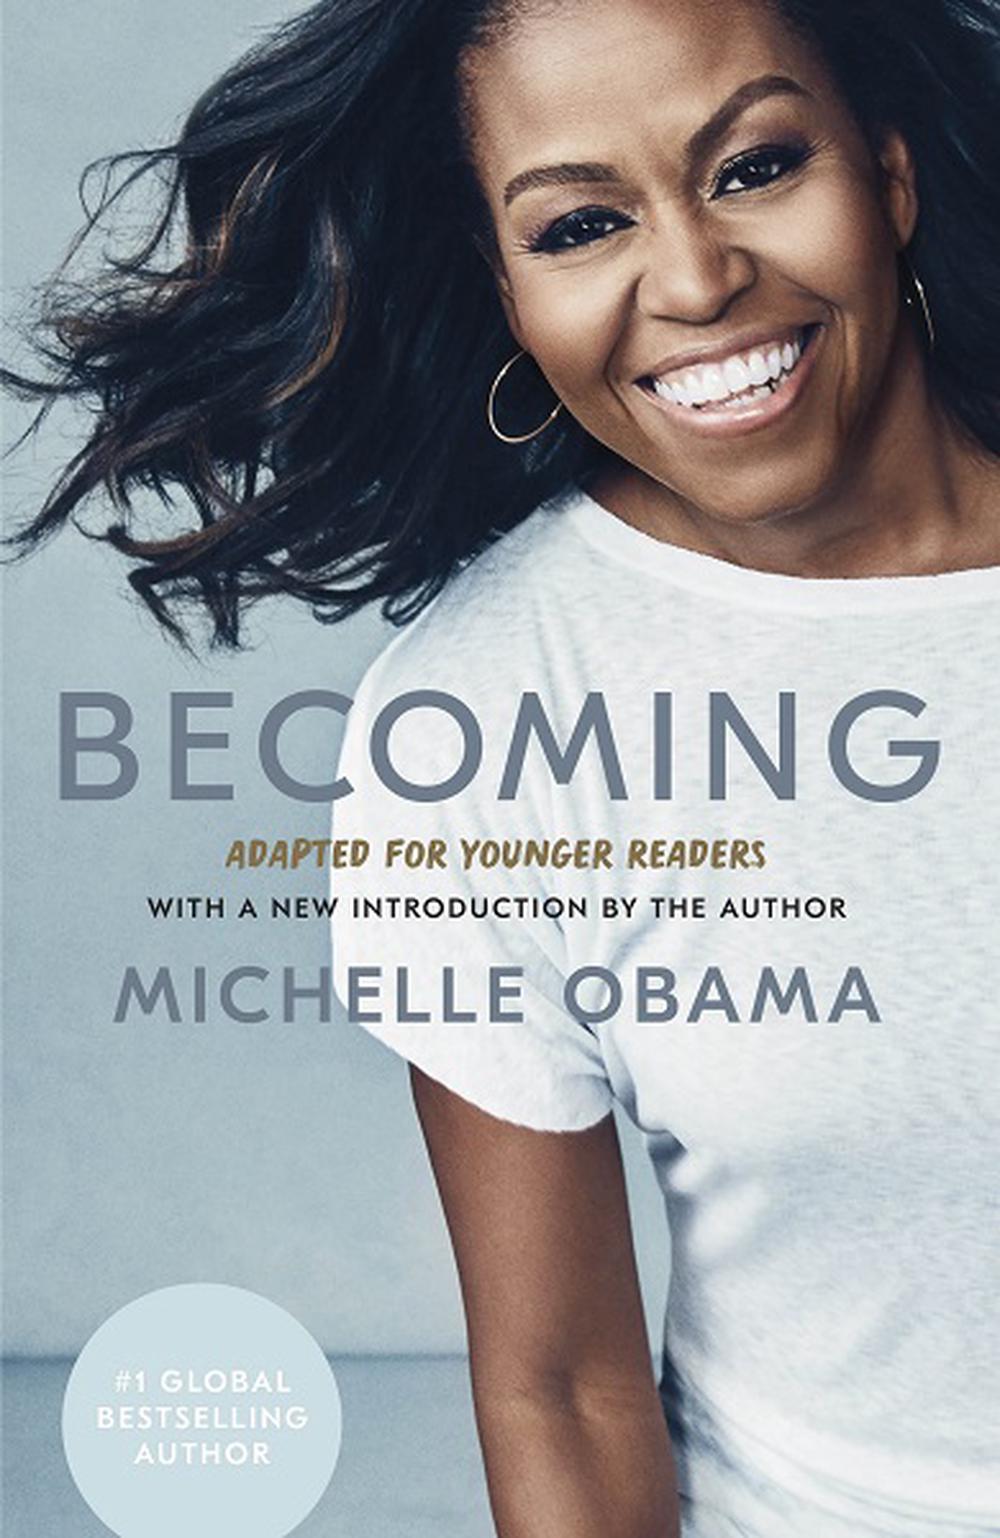 Becoming by Michelle Obama, Hardcover, 9780241531815 | Buy online at ...